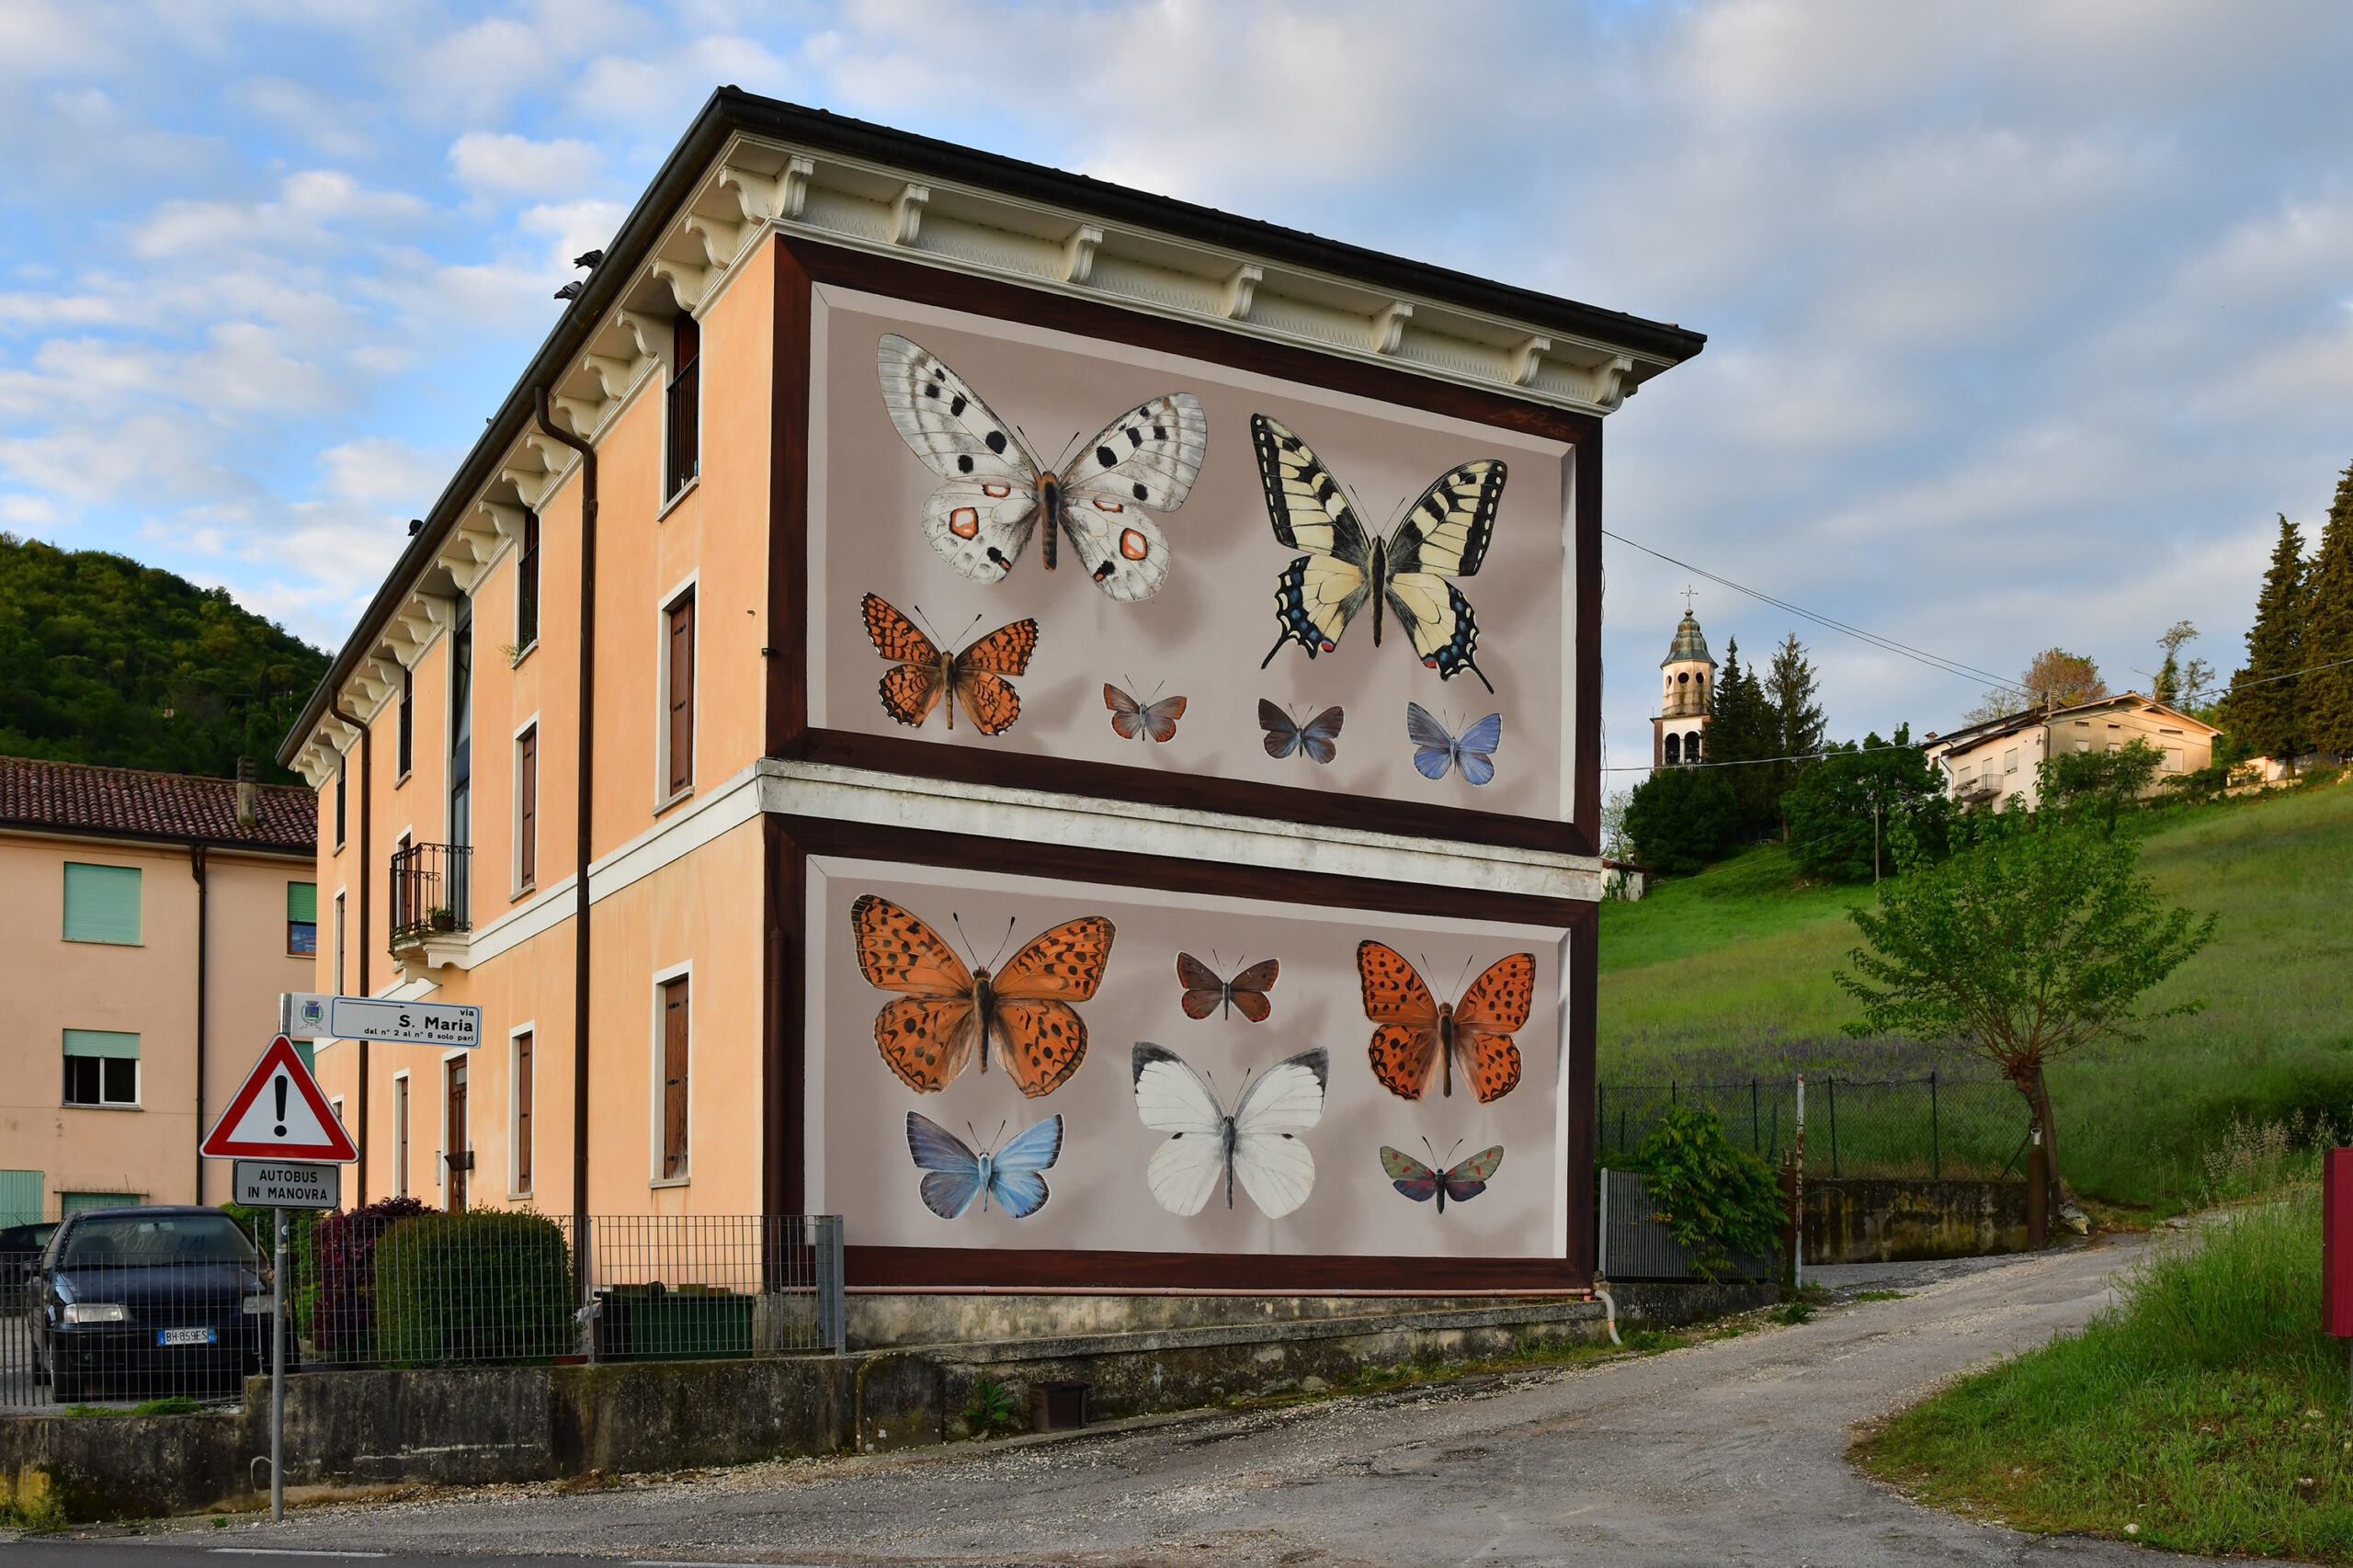 Large butterfly mural on the side of a building